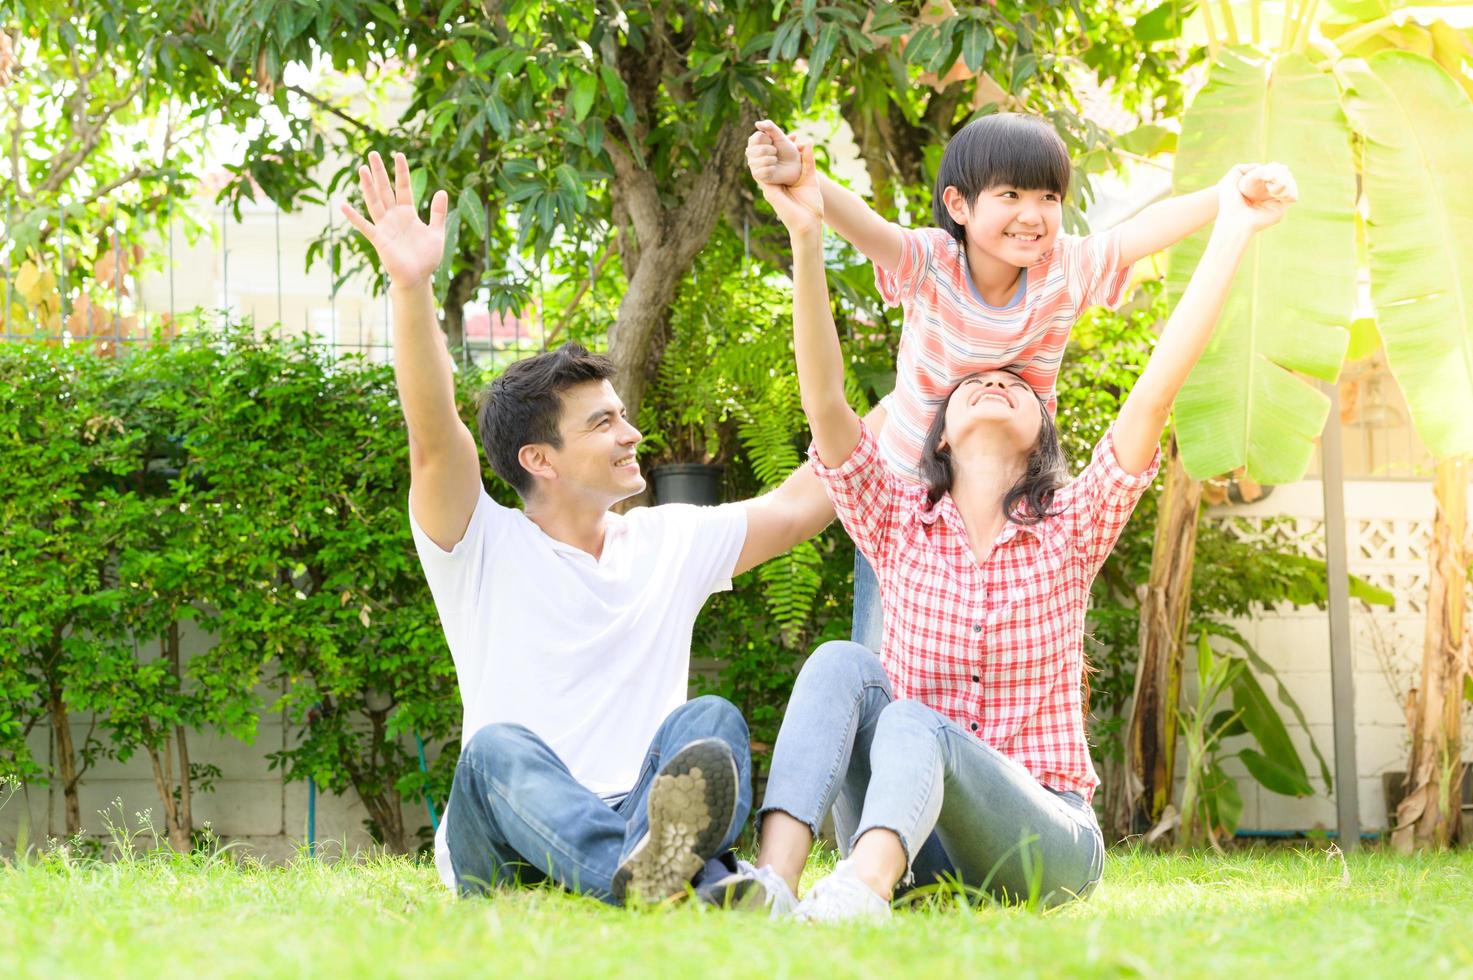 A happy young family spends time playing together in the garden at the front of house the vacation. photo